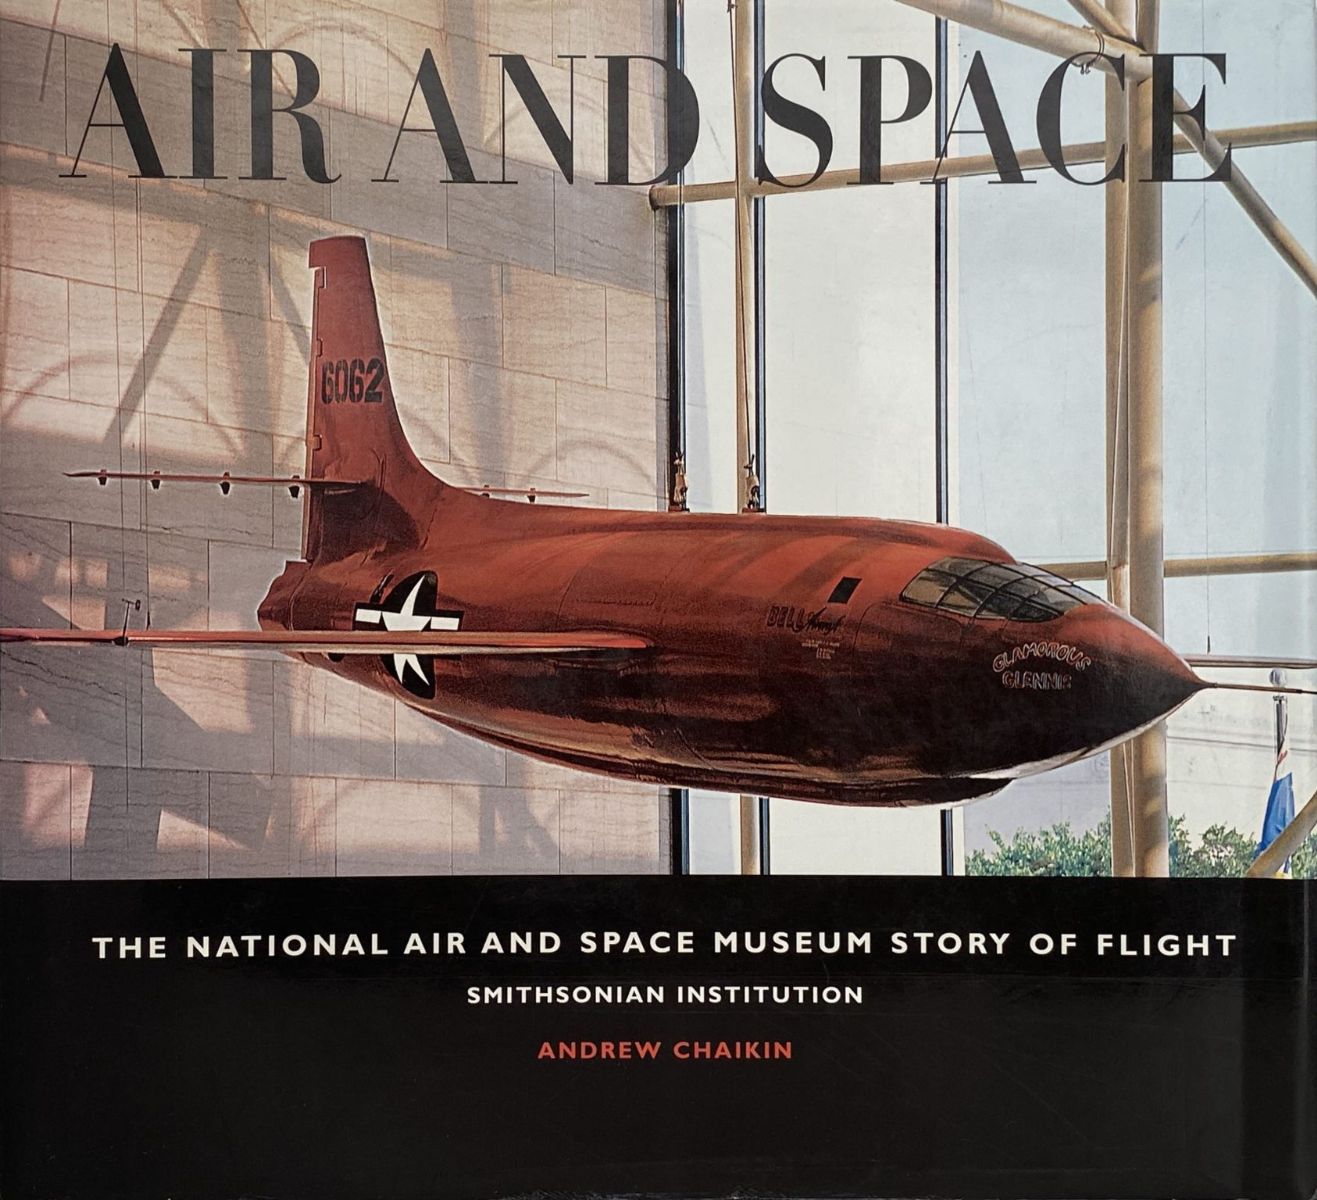 AIR AND SPACE: The National Air and Space Museum Story of Flight